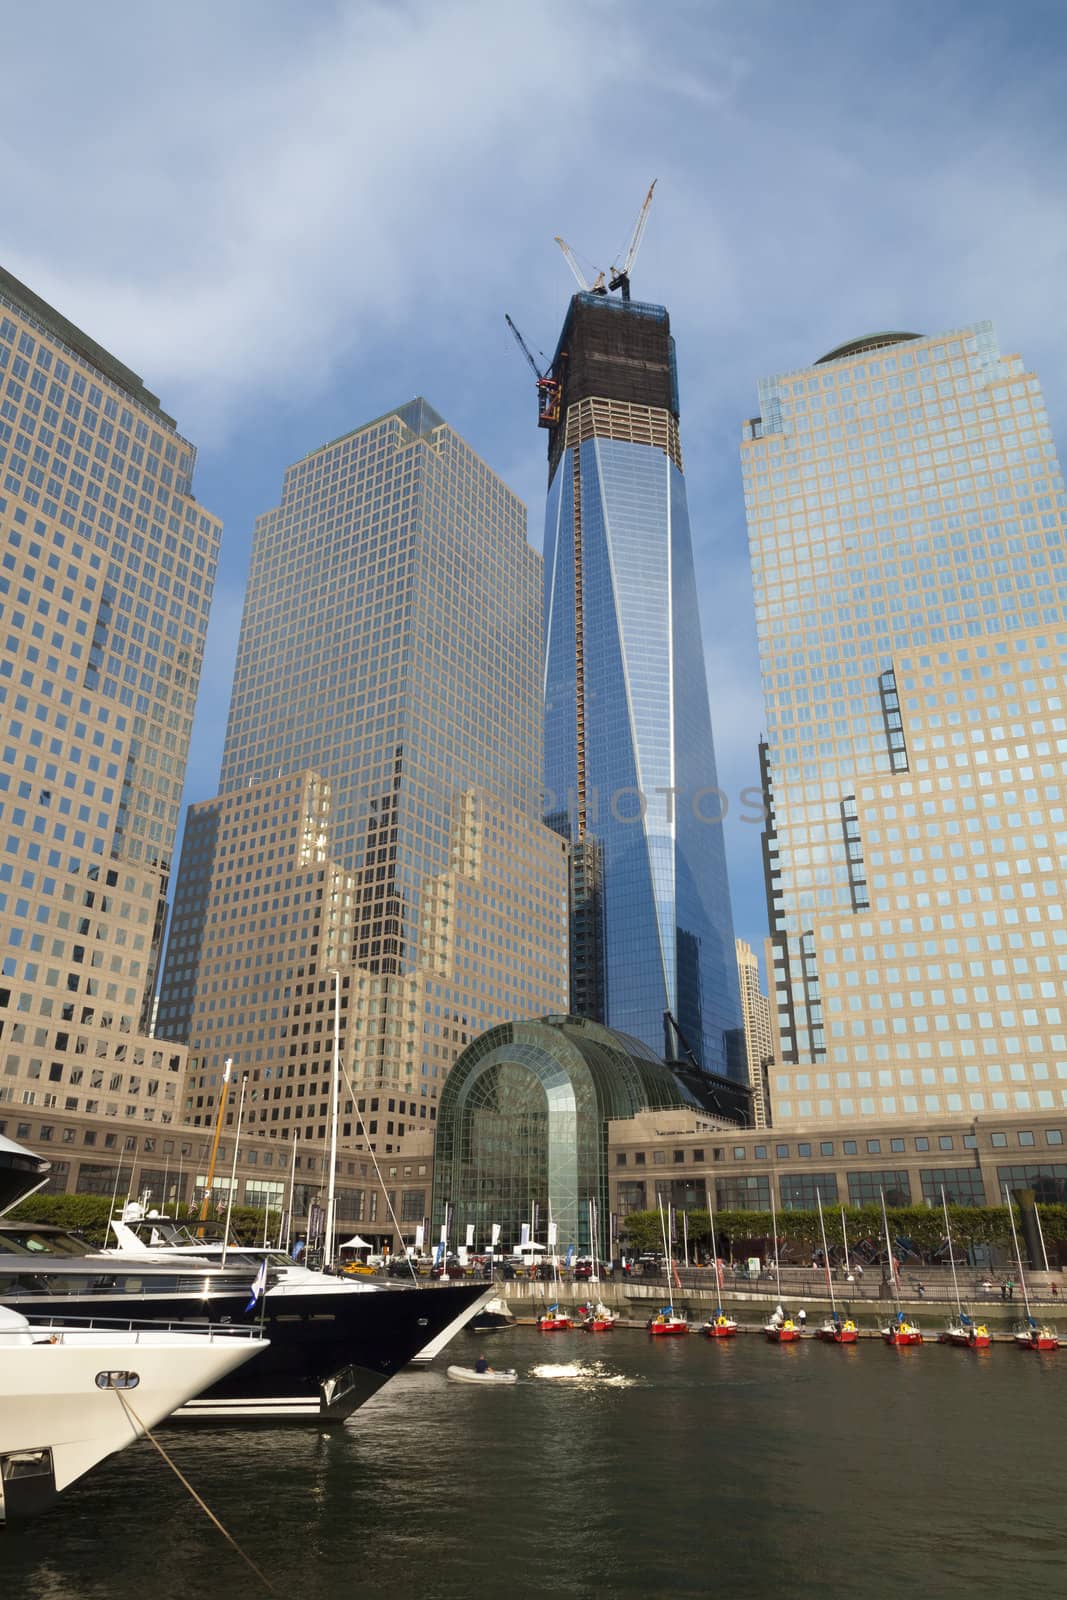 NEW YORK CITY - SEPTEMBER 17: One World Trade Center (formerly known as the Freedom Tower) is shown under construction on September 17, 2012 in New York, New York.